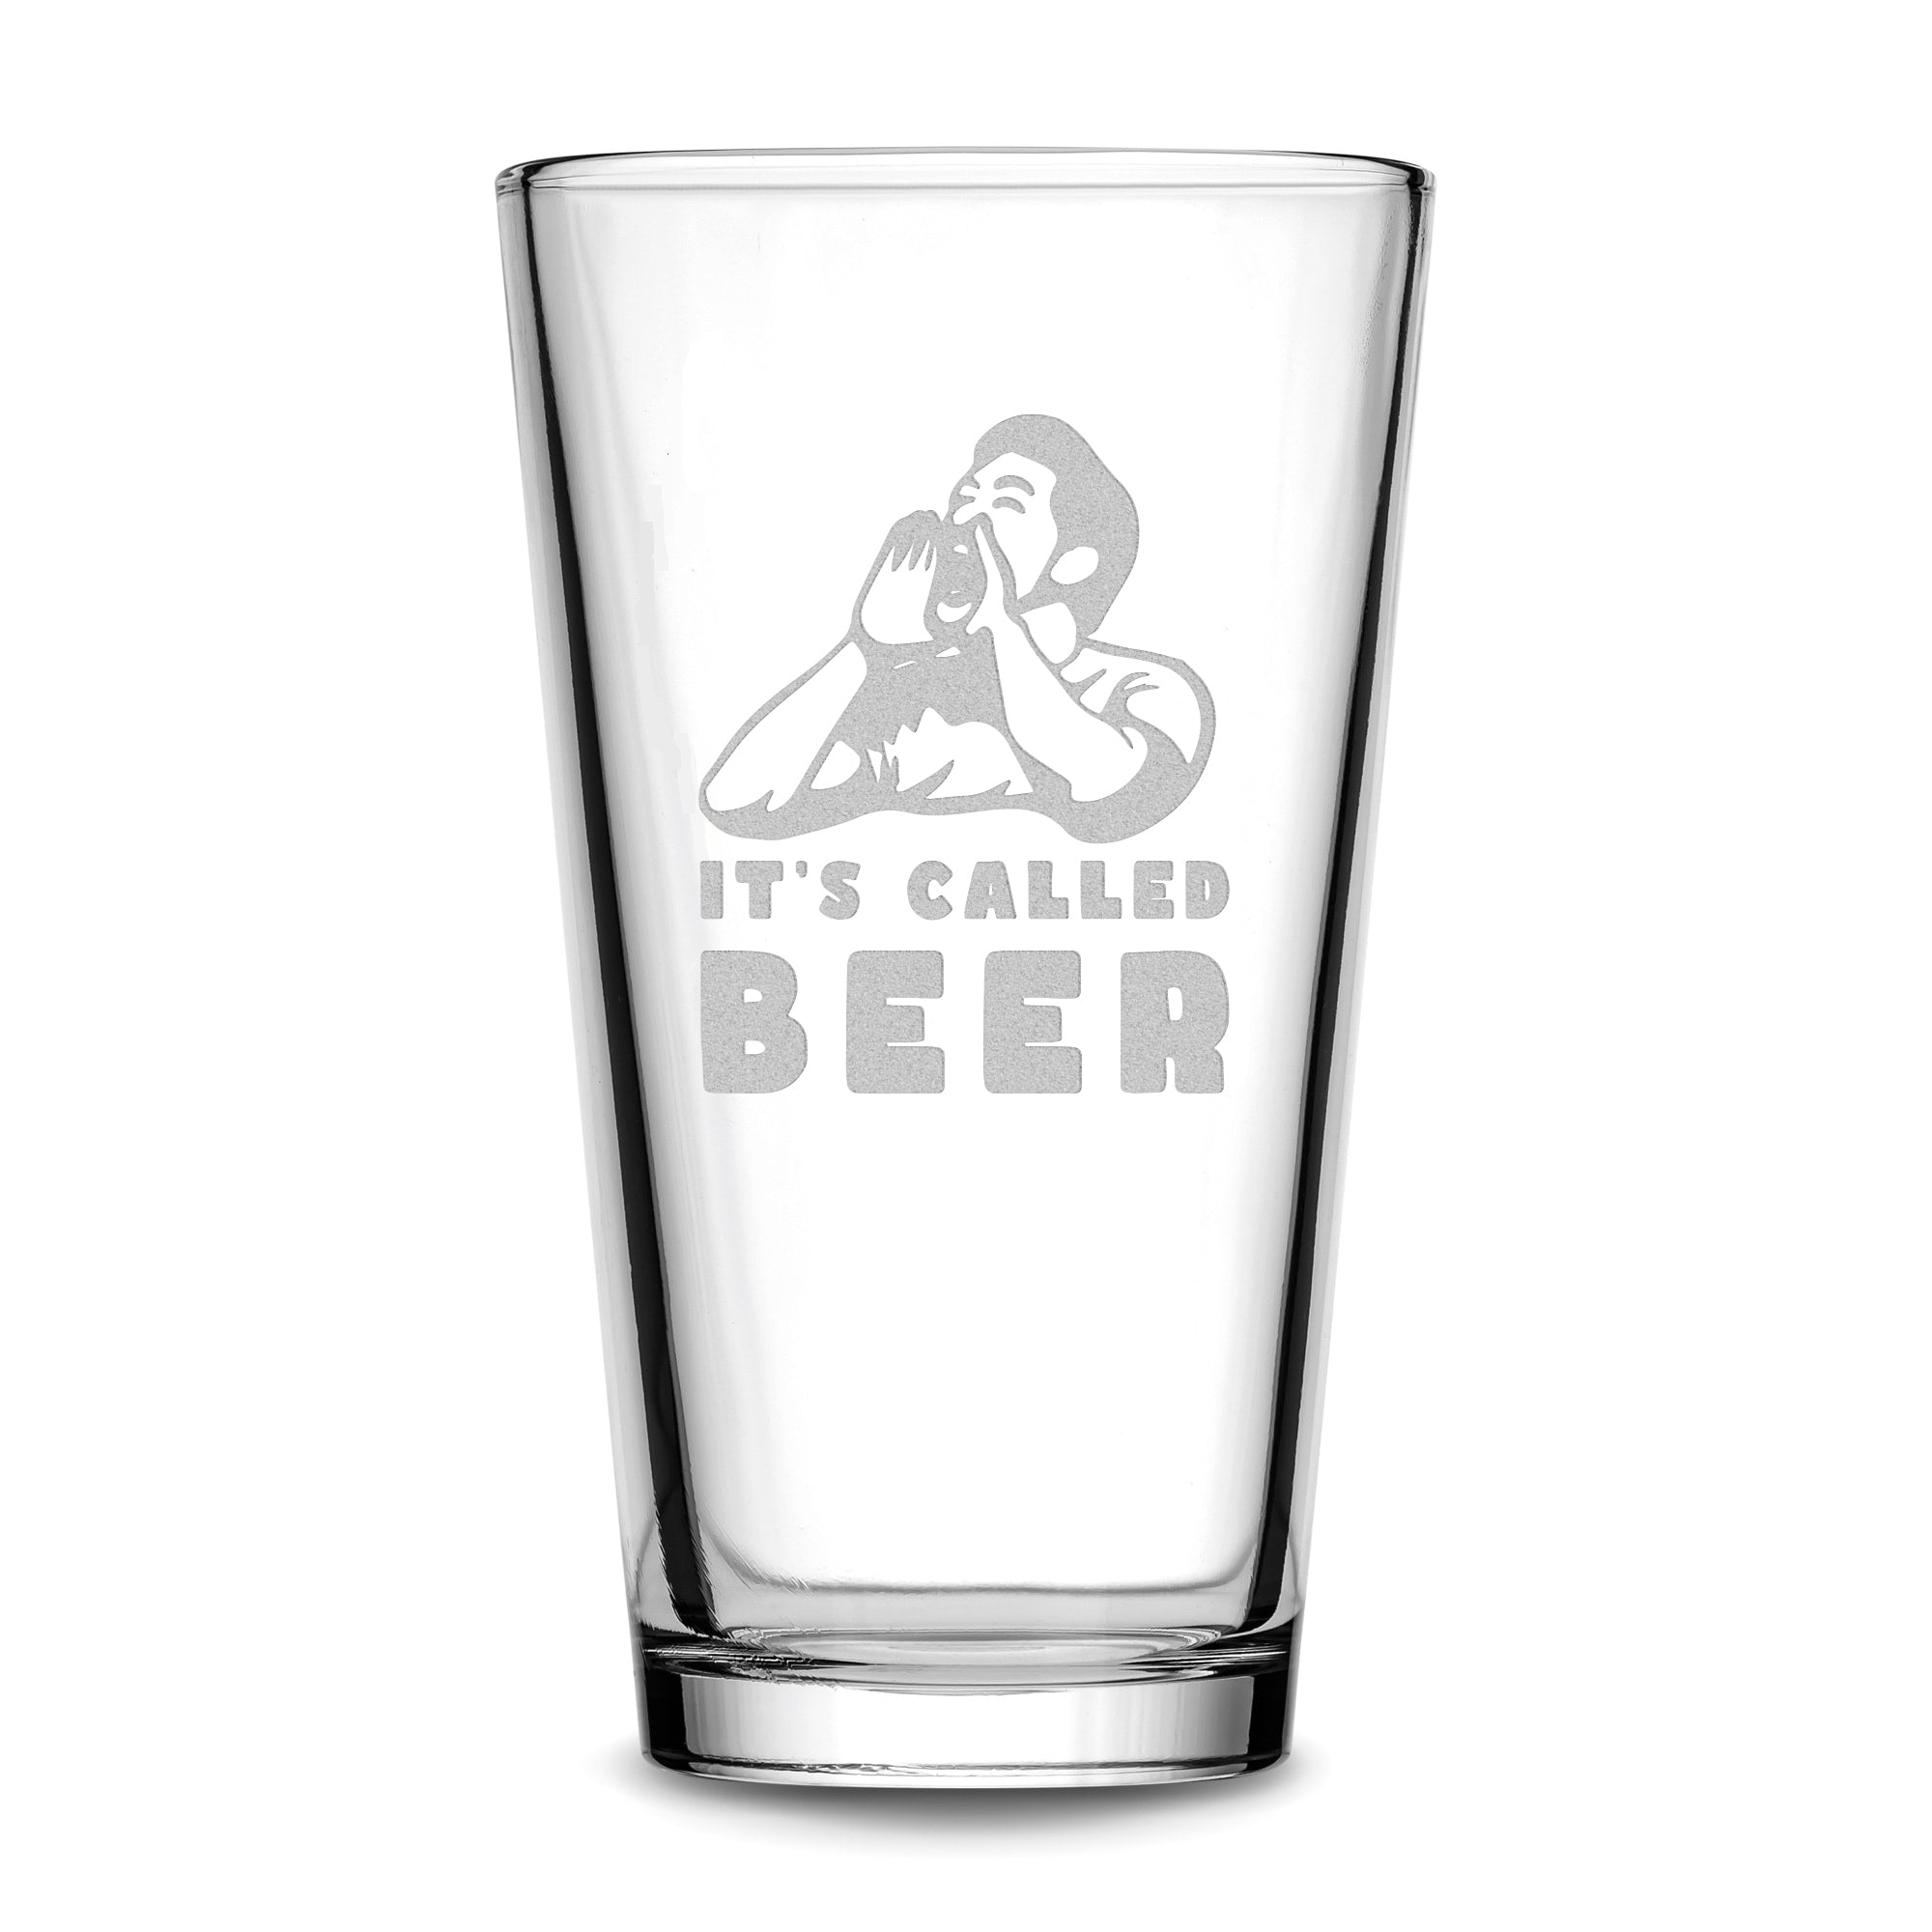 Premium Beer Pint Glass, It's Called Beer, 16oz, Laser Etched or Hand Etched